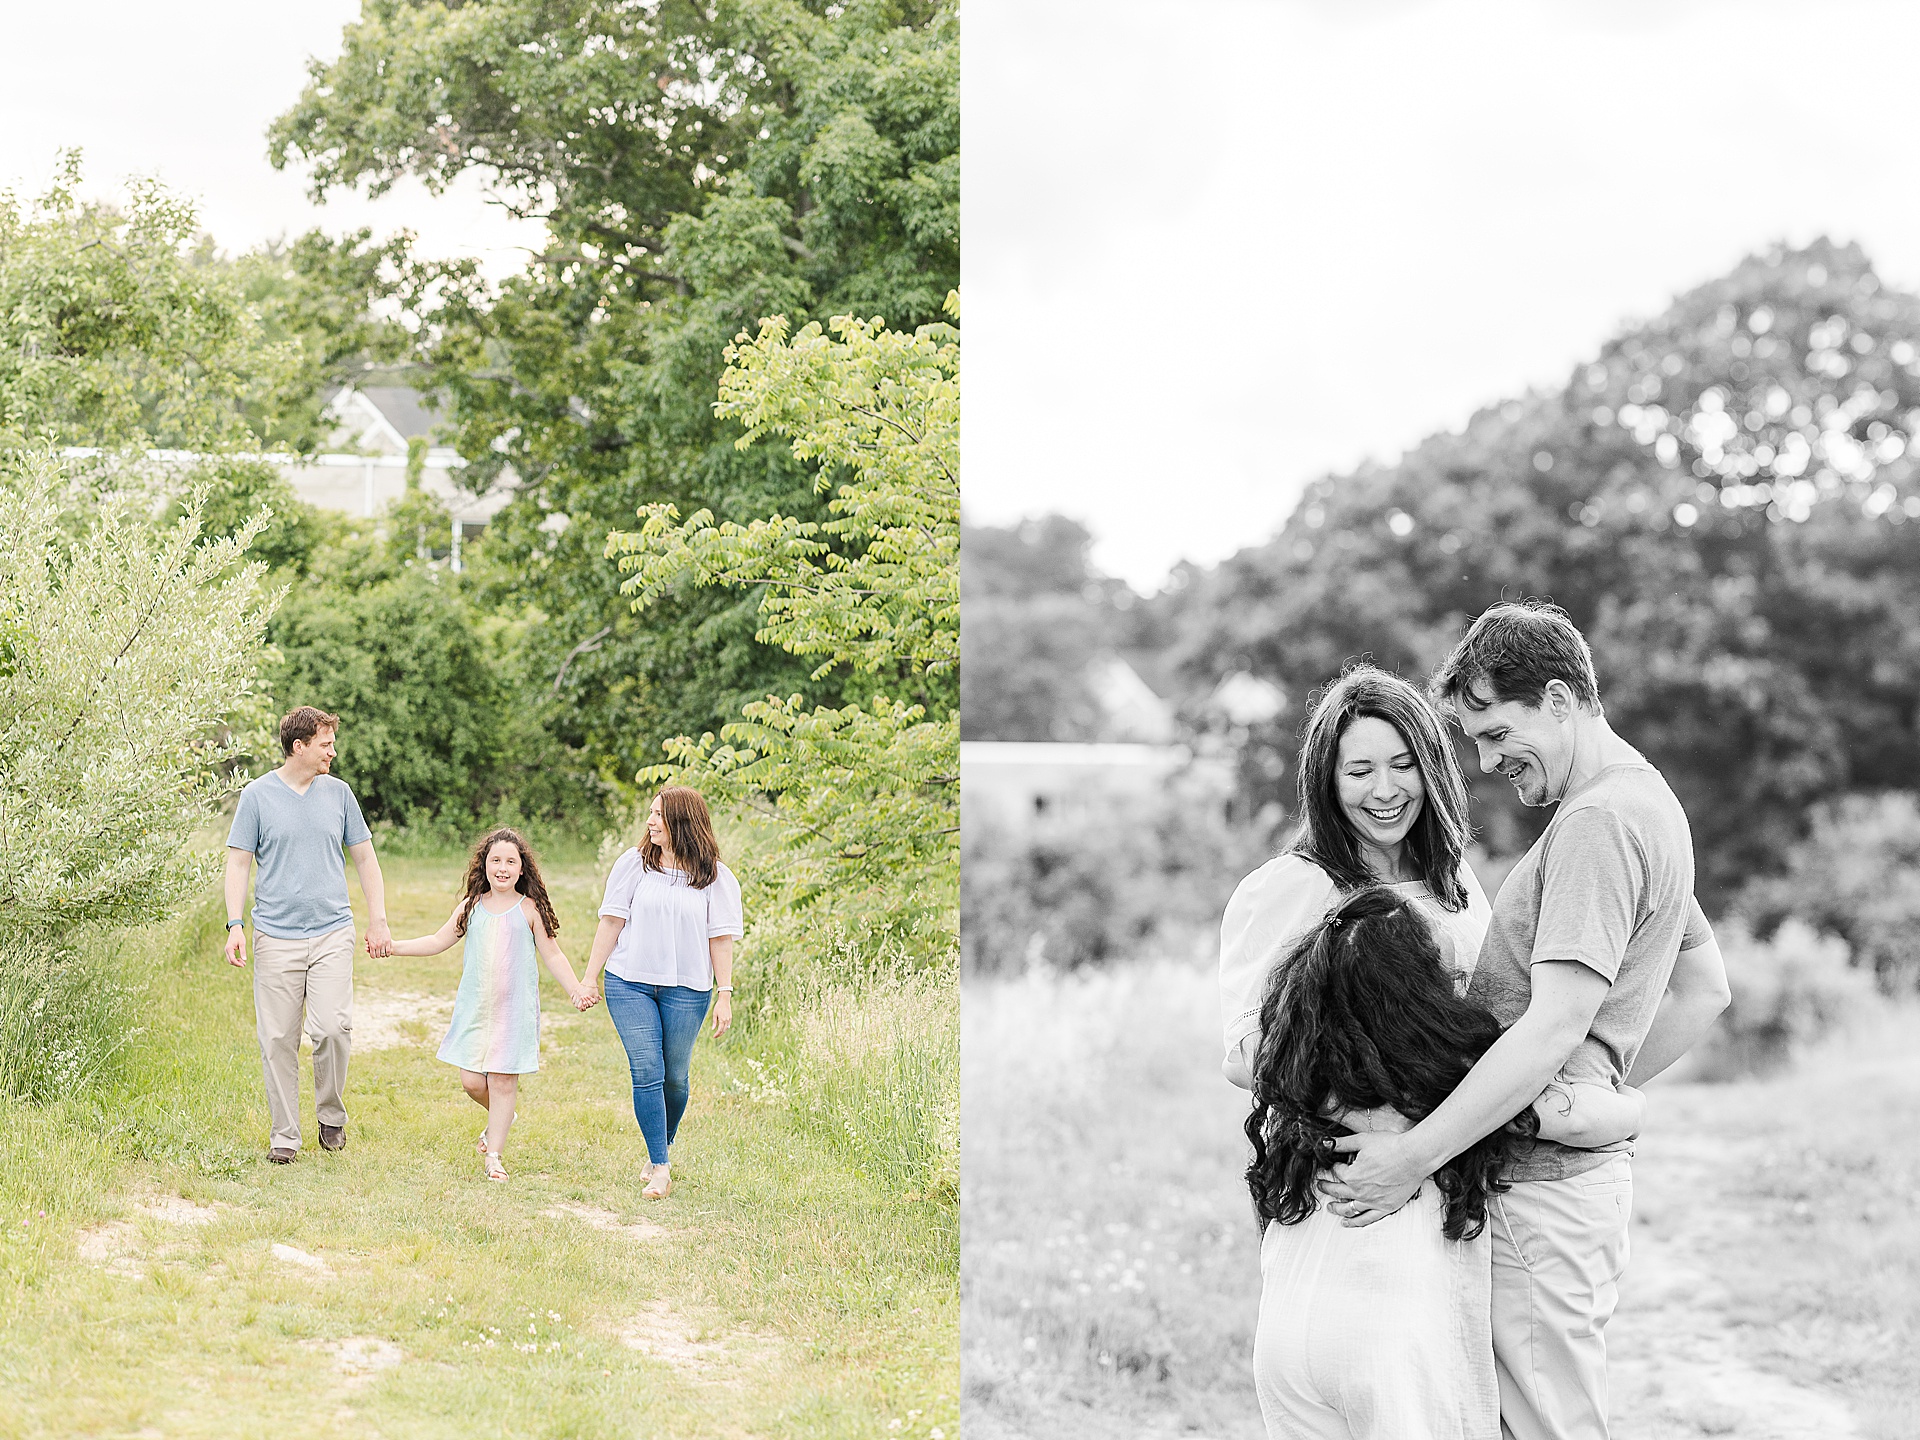 family walks together during family photo session with Sara Sniderman Photography at Breakneck Hill Conservation Land, Southborough Massachusetts